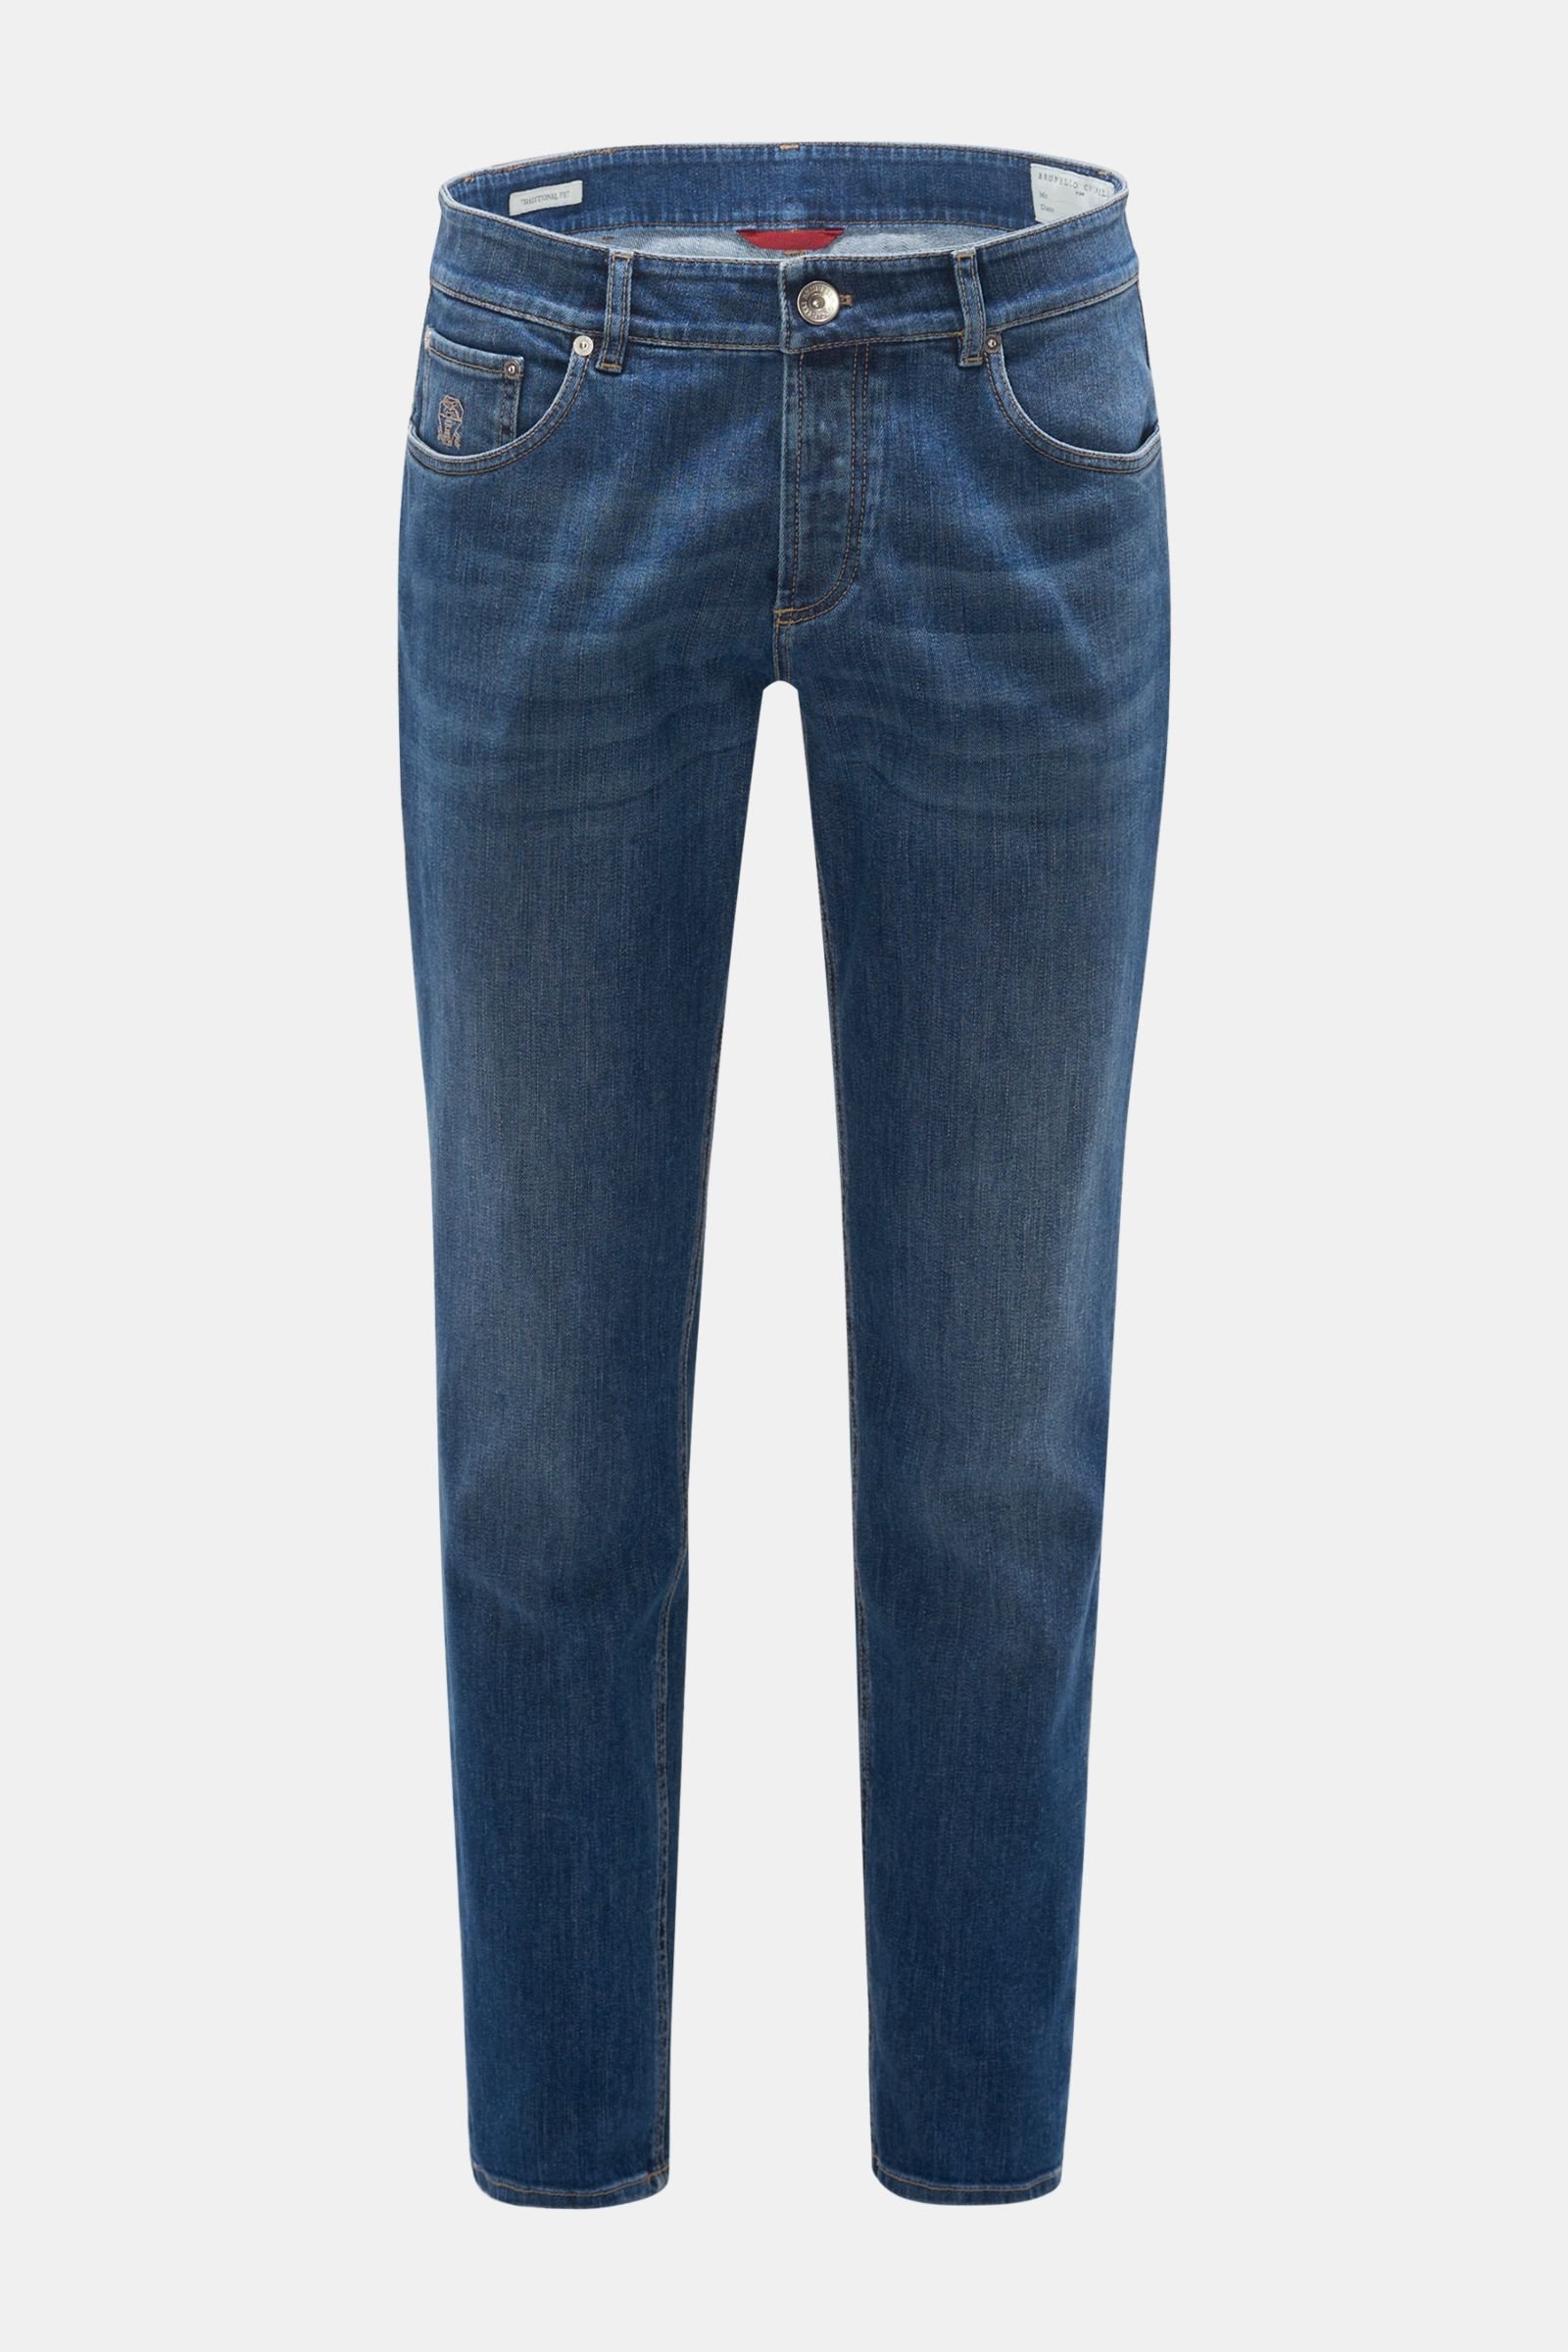 Jeans 'Traditional Fit' grey-blue